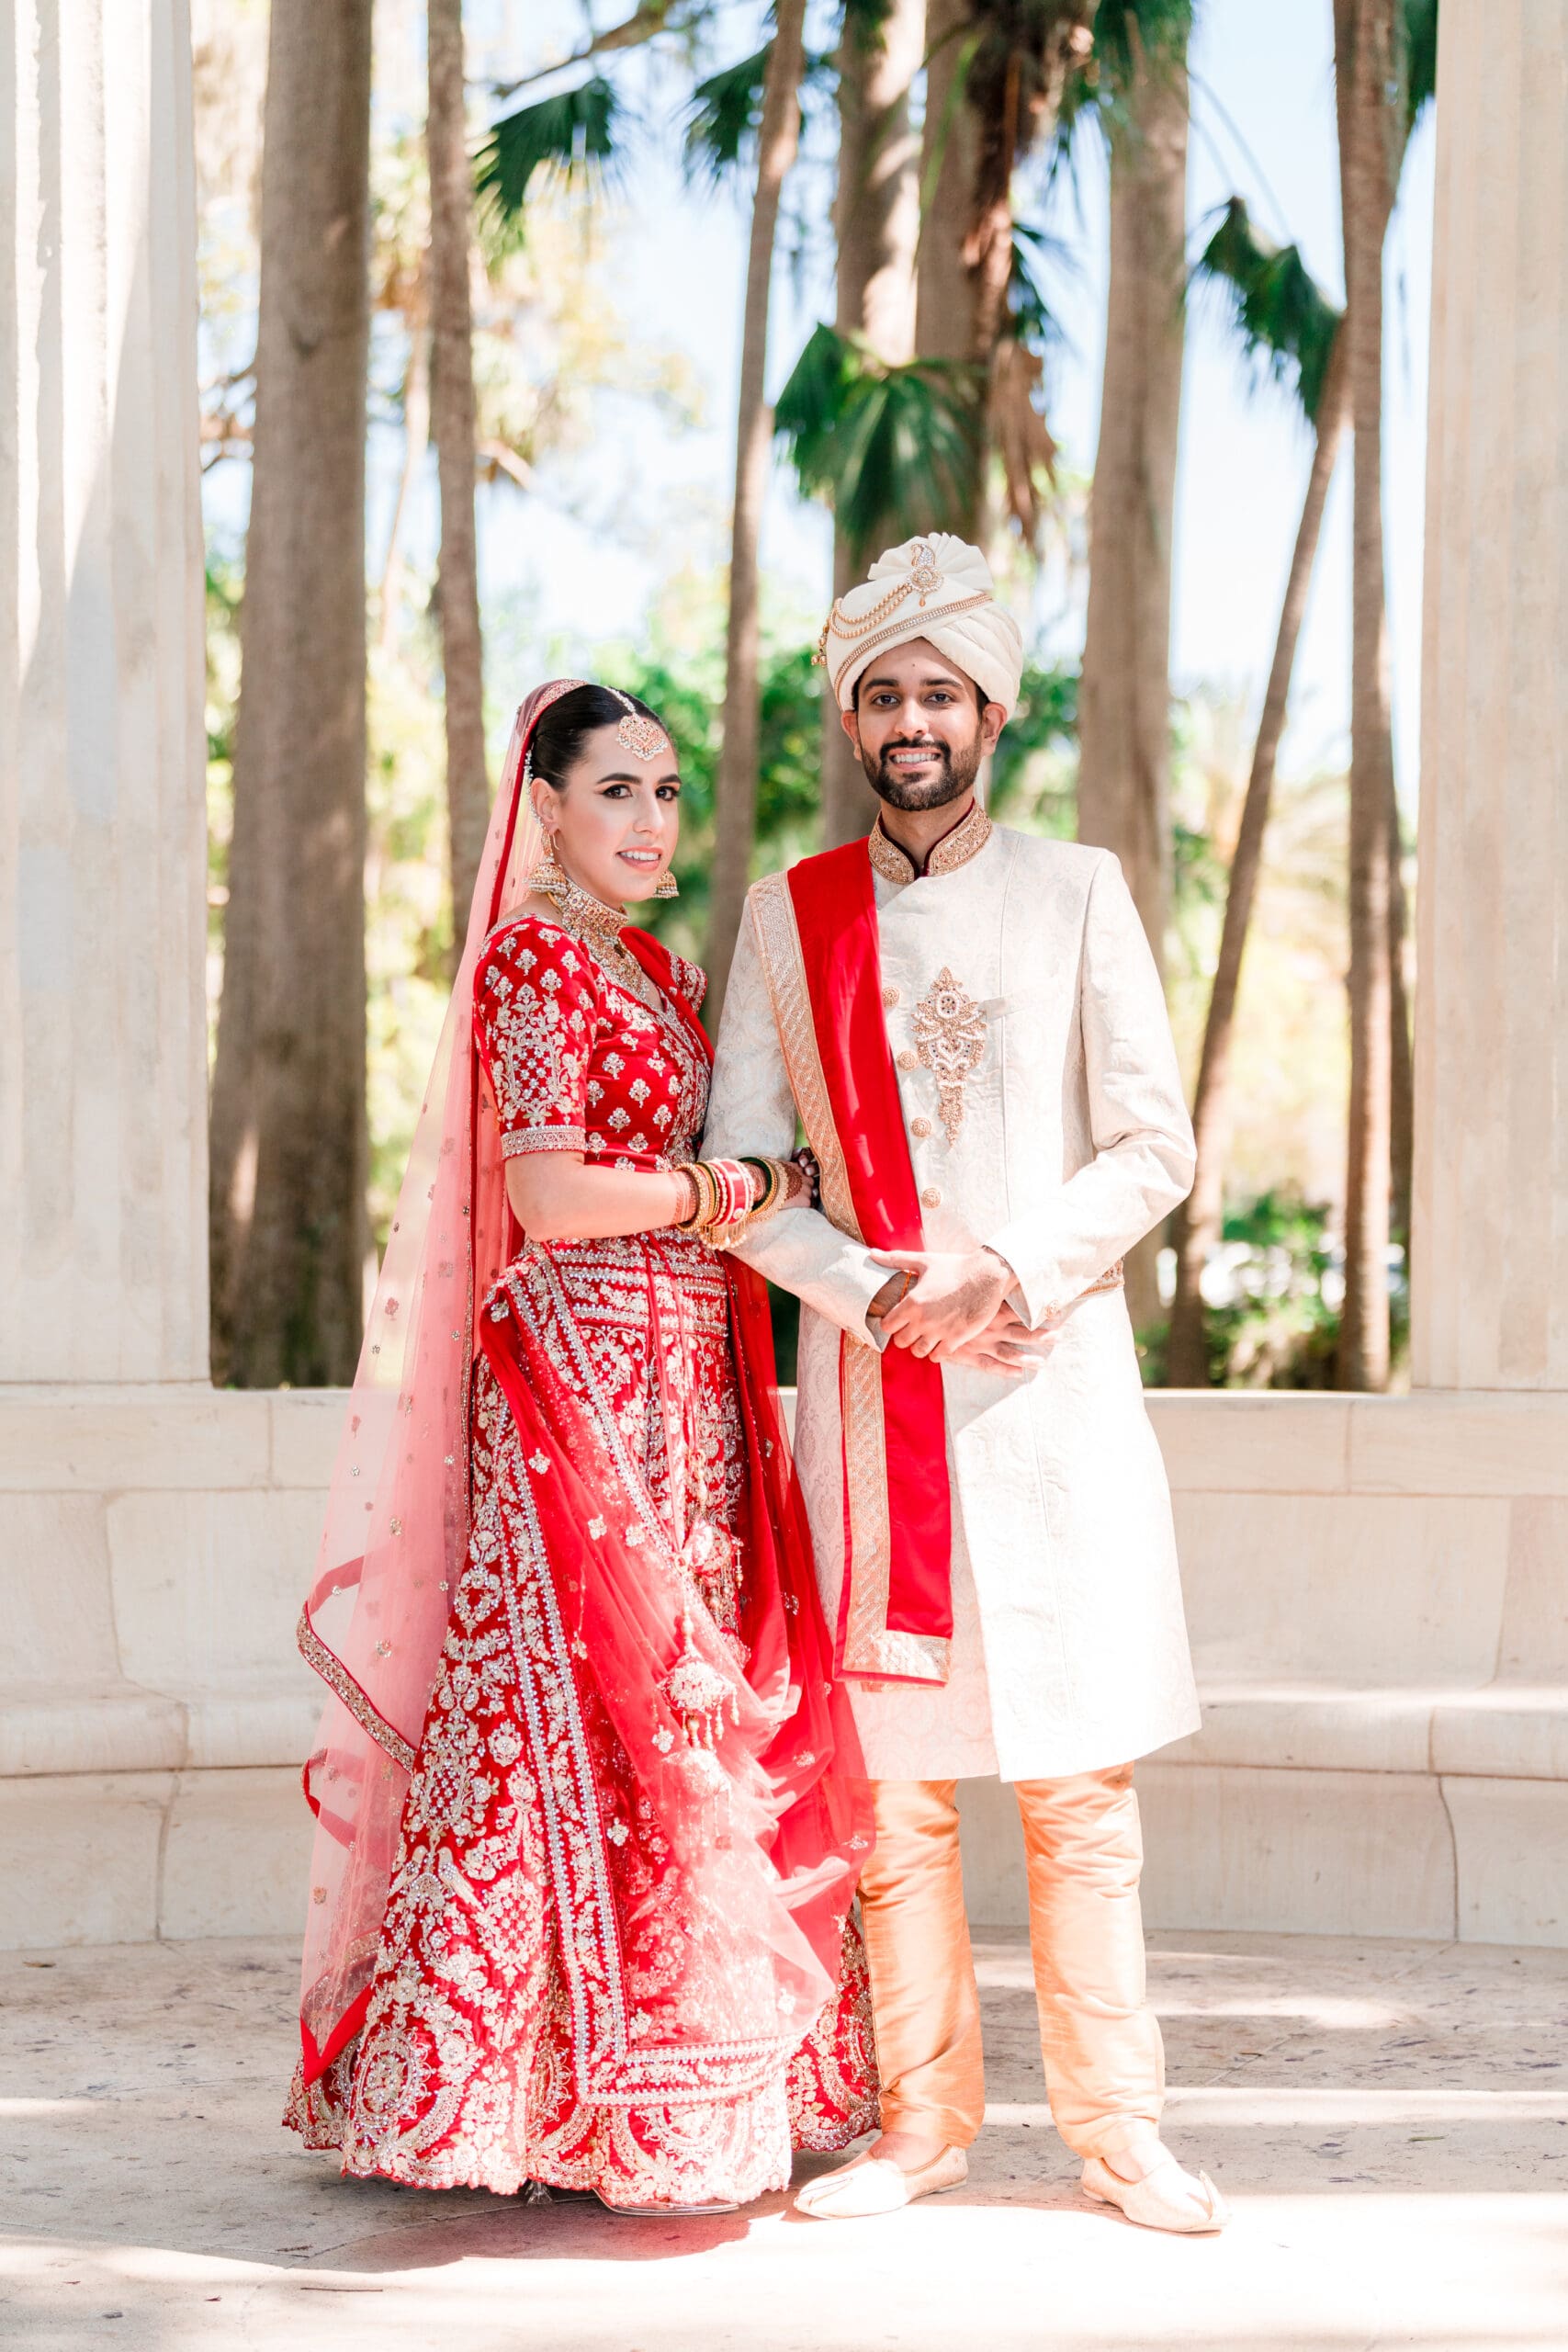 Sabrina and Rahul in traditional Indian wedding attire, standing amidst the scenic beauty of Kraft Azalea Gardens, captured in a long shot by Jerzy.